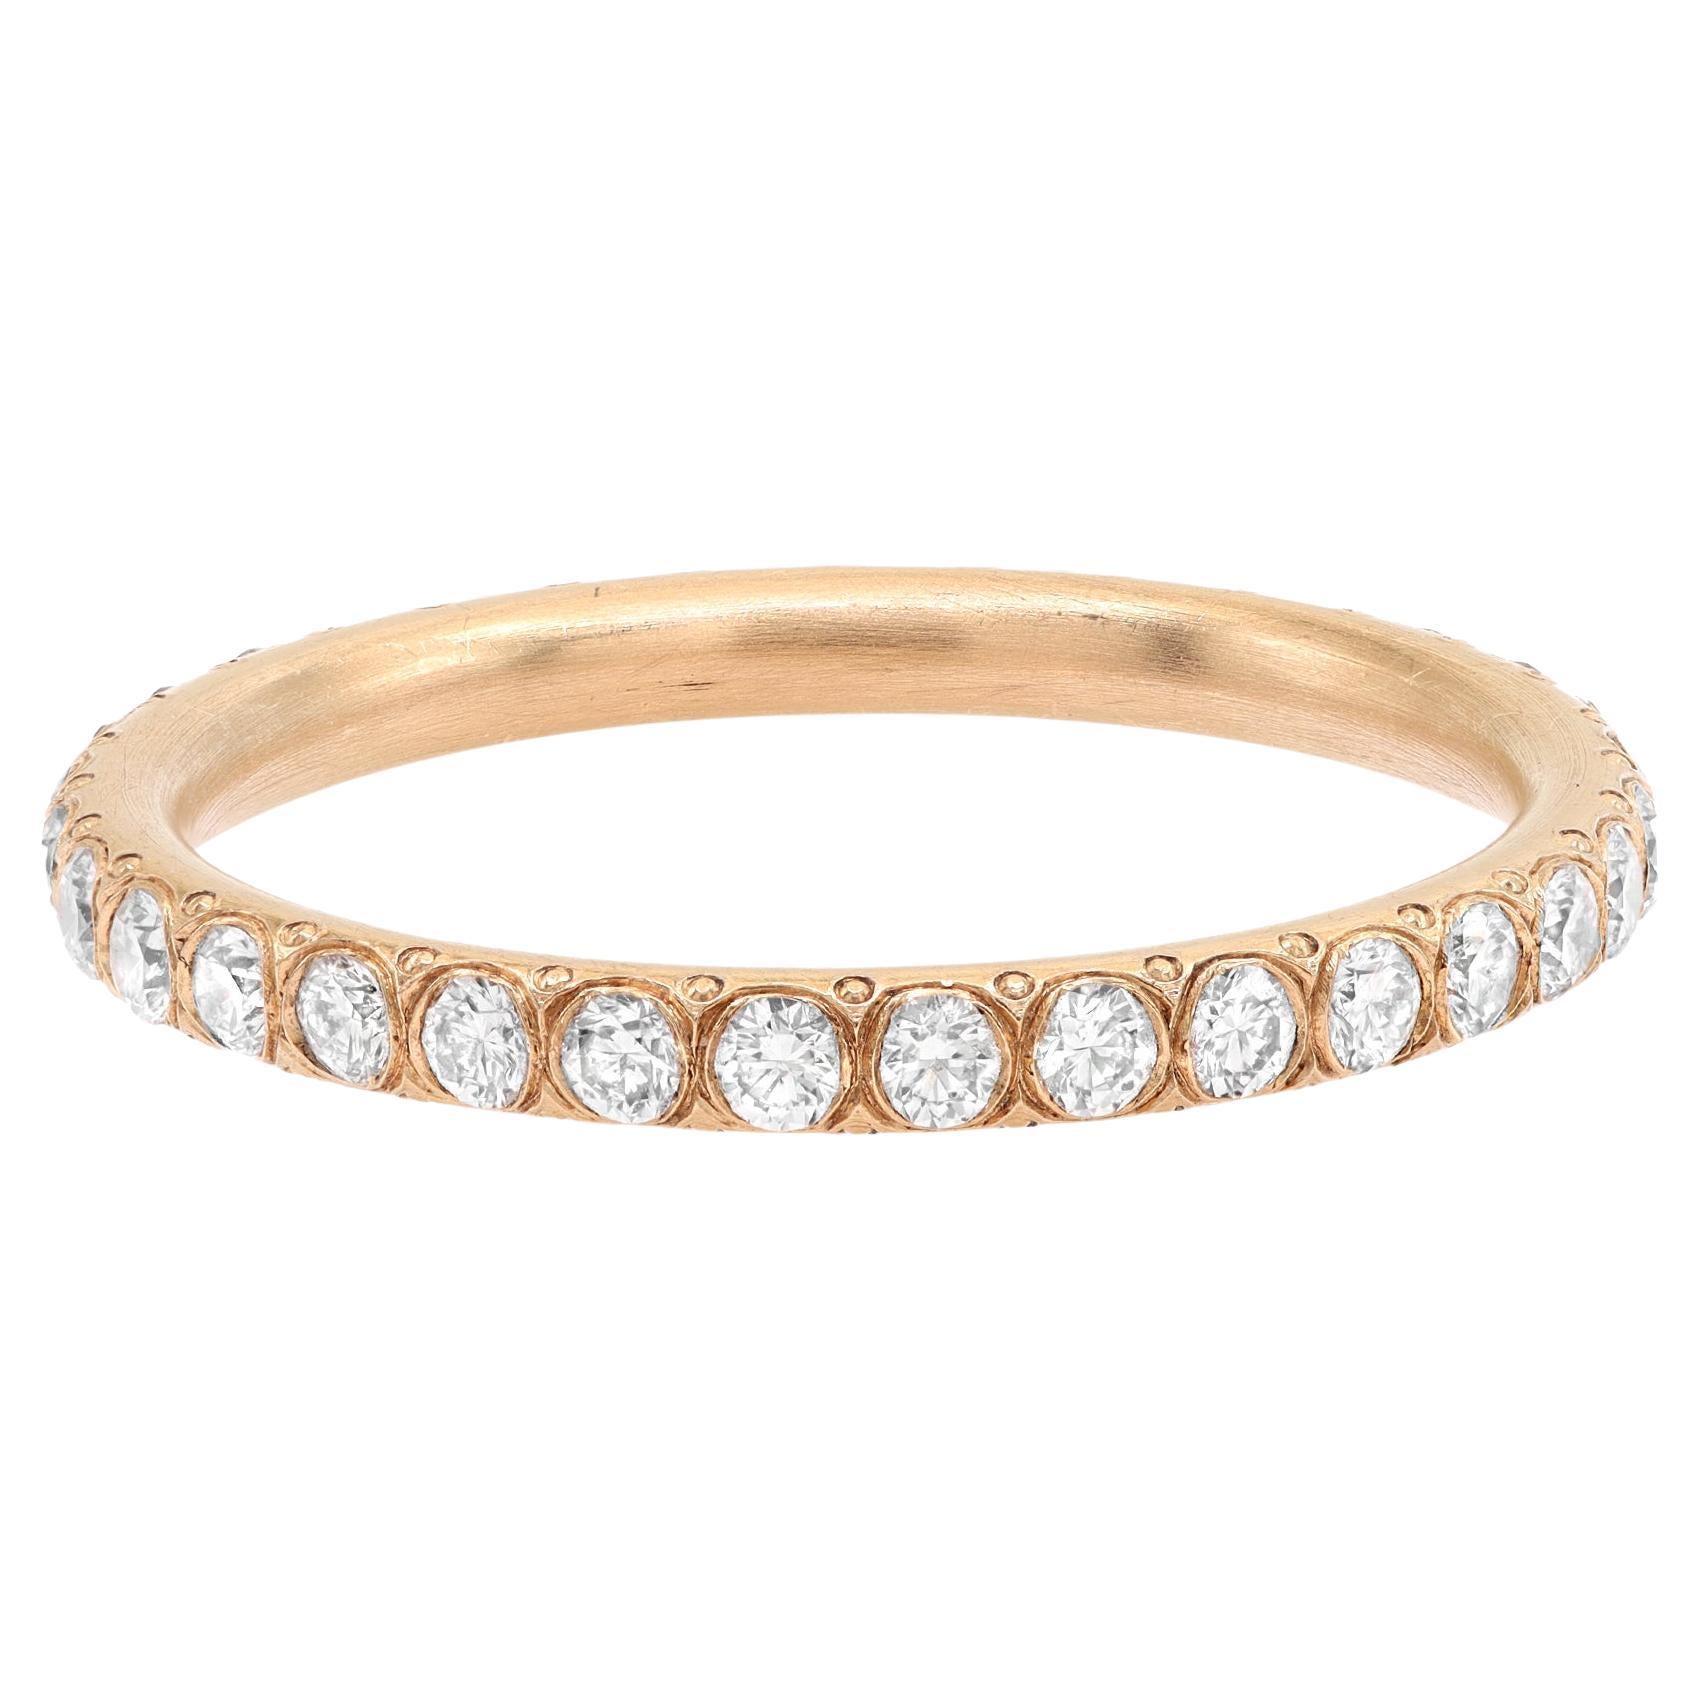 Art Deco Setting Diamond Eternity Band Ring 18K Rose Gold 0.65Cttw Size 5.25 For Sale